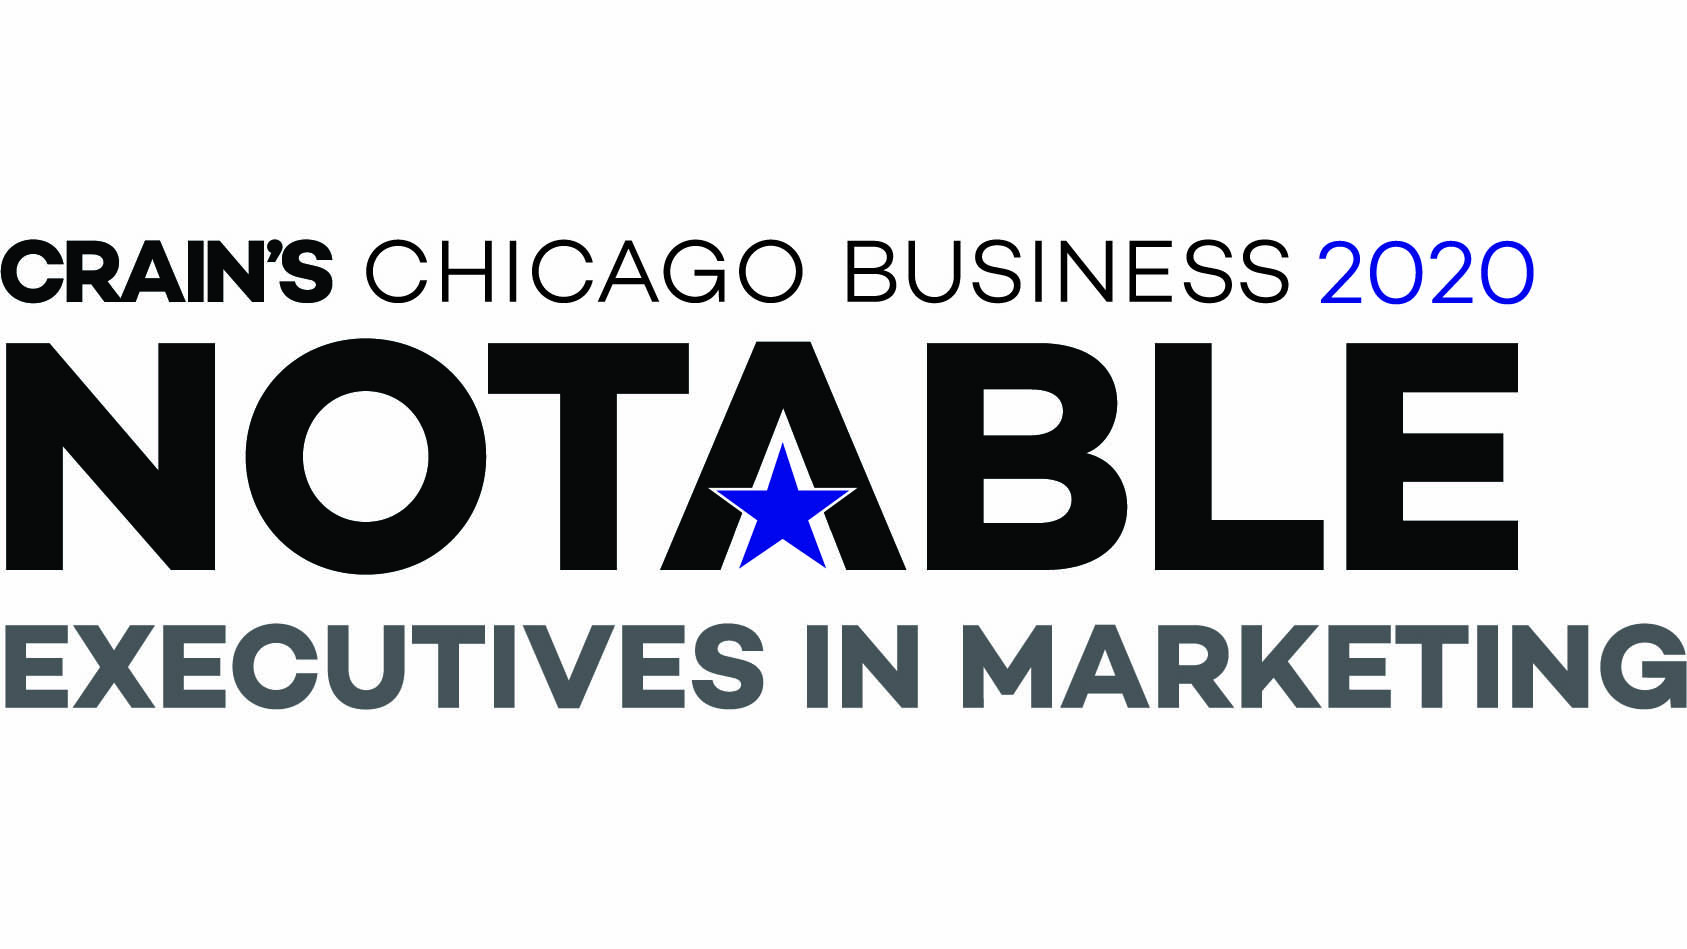 Crain's Chicago Business 2020 Notable Executives in Marketing